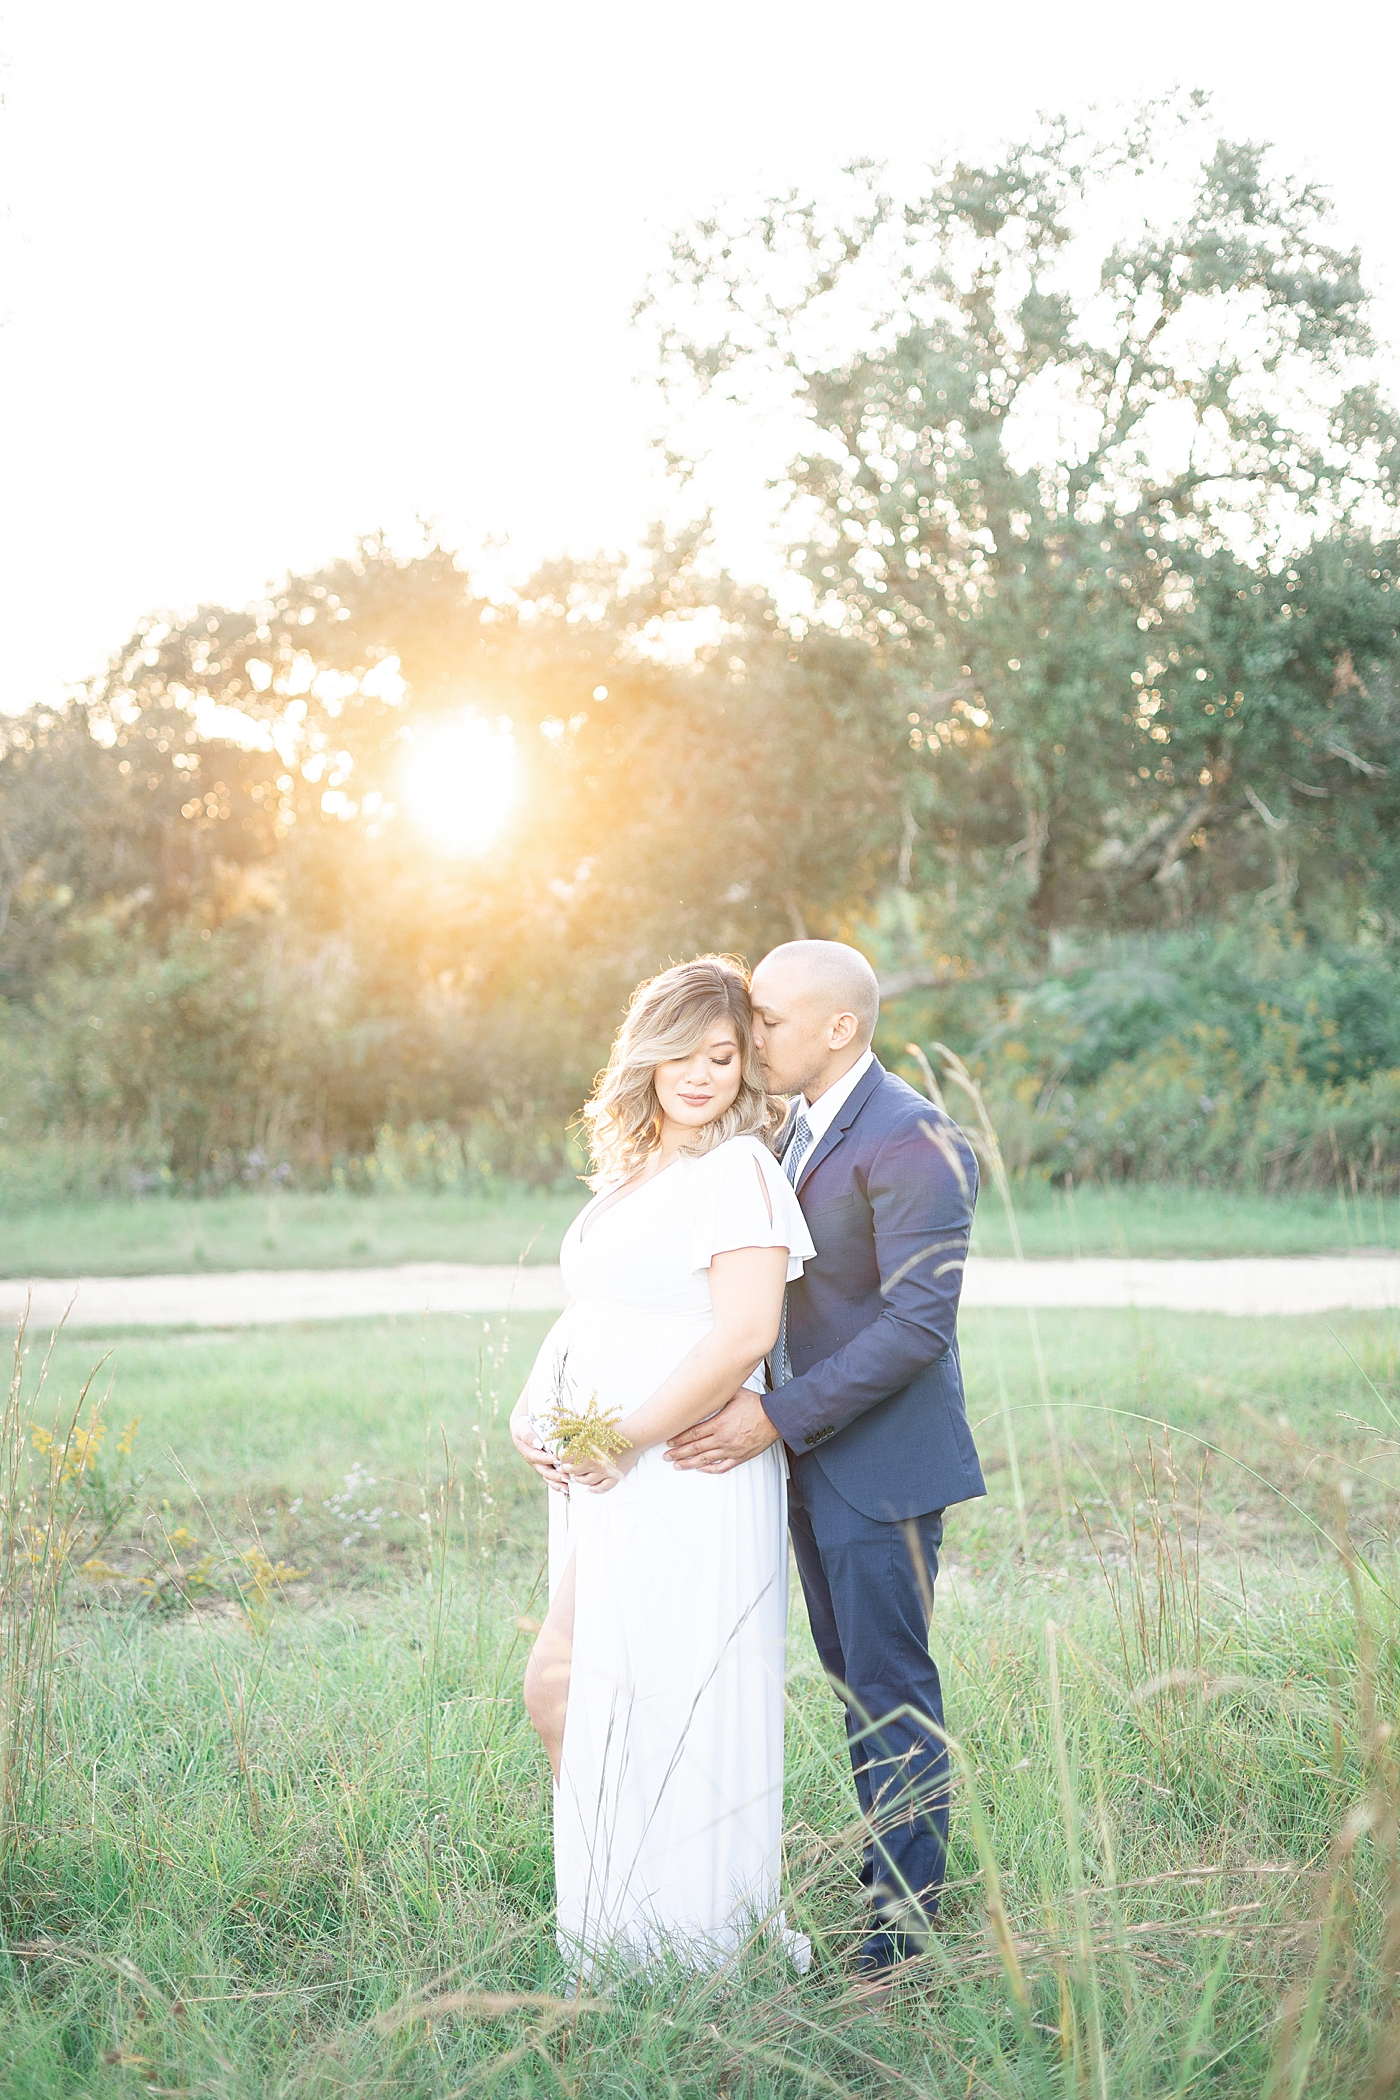 Mom and dad to be snuggling in a field at sunset | Photo by Gulfport MS Maternity and Newborn Photographer Little Sunshine Photography 